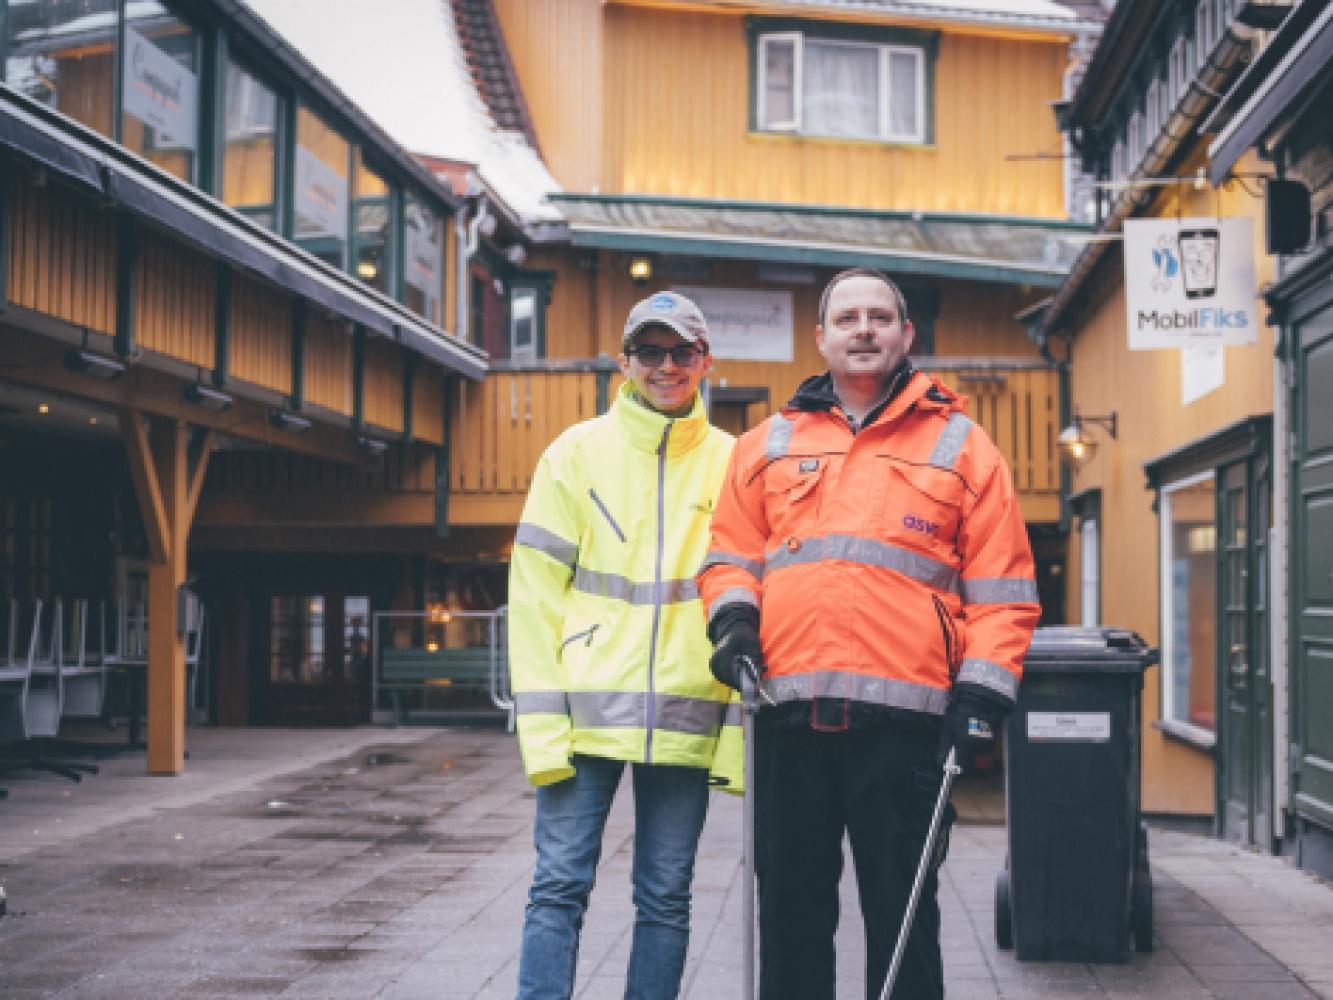 These two everyday heroes work for Tromsø ASVO